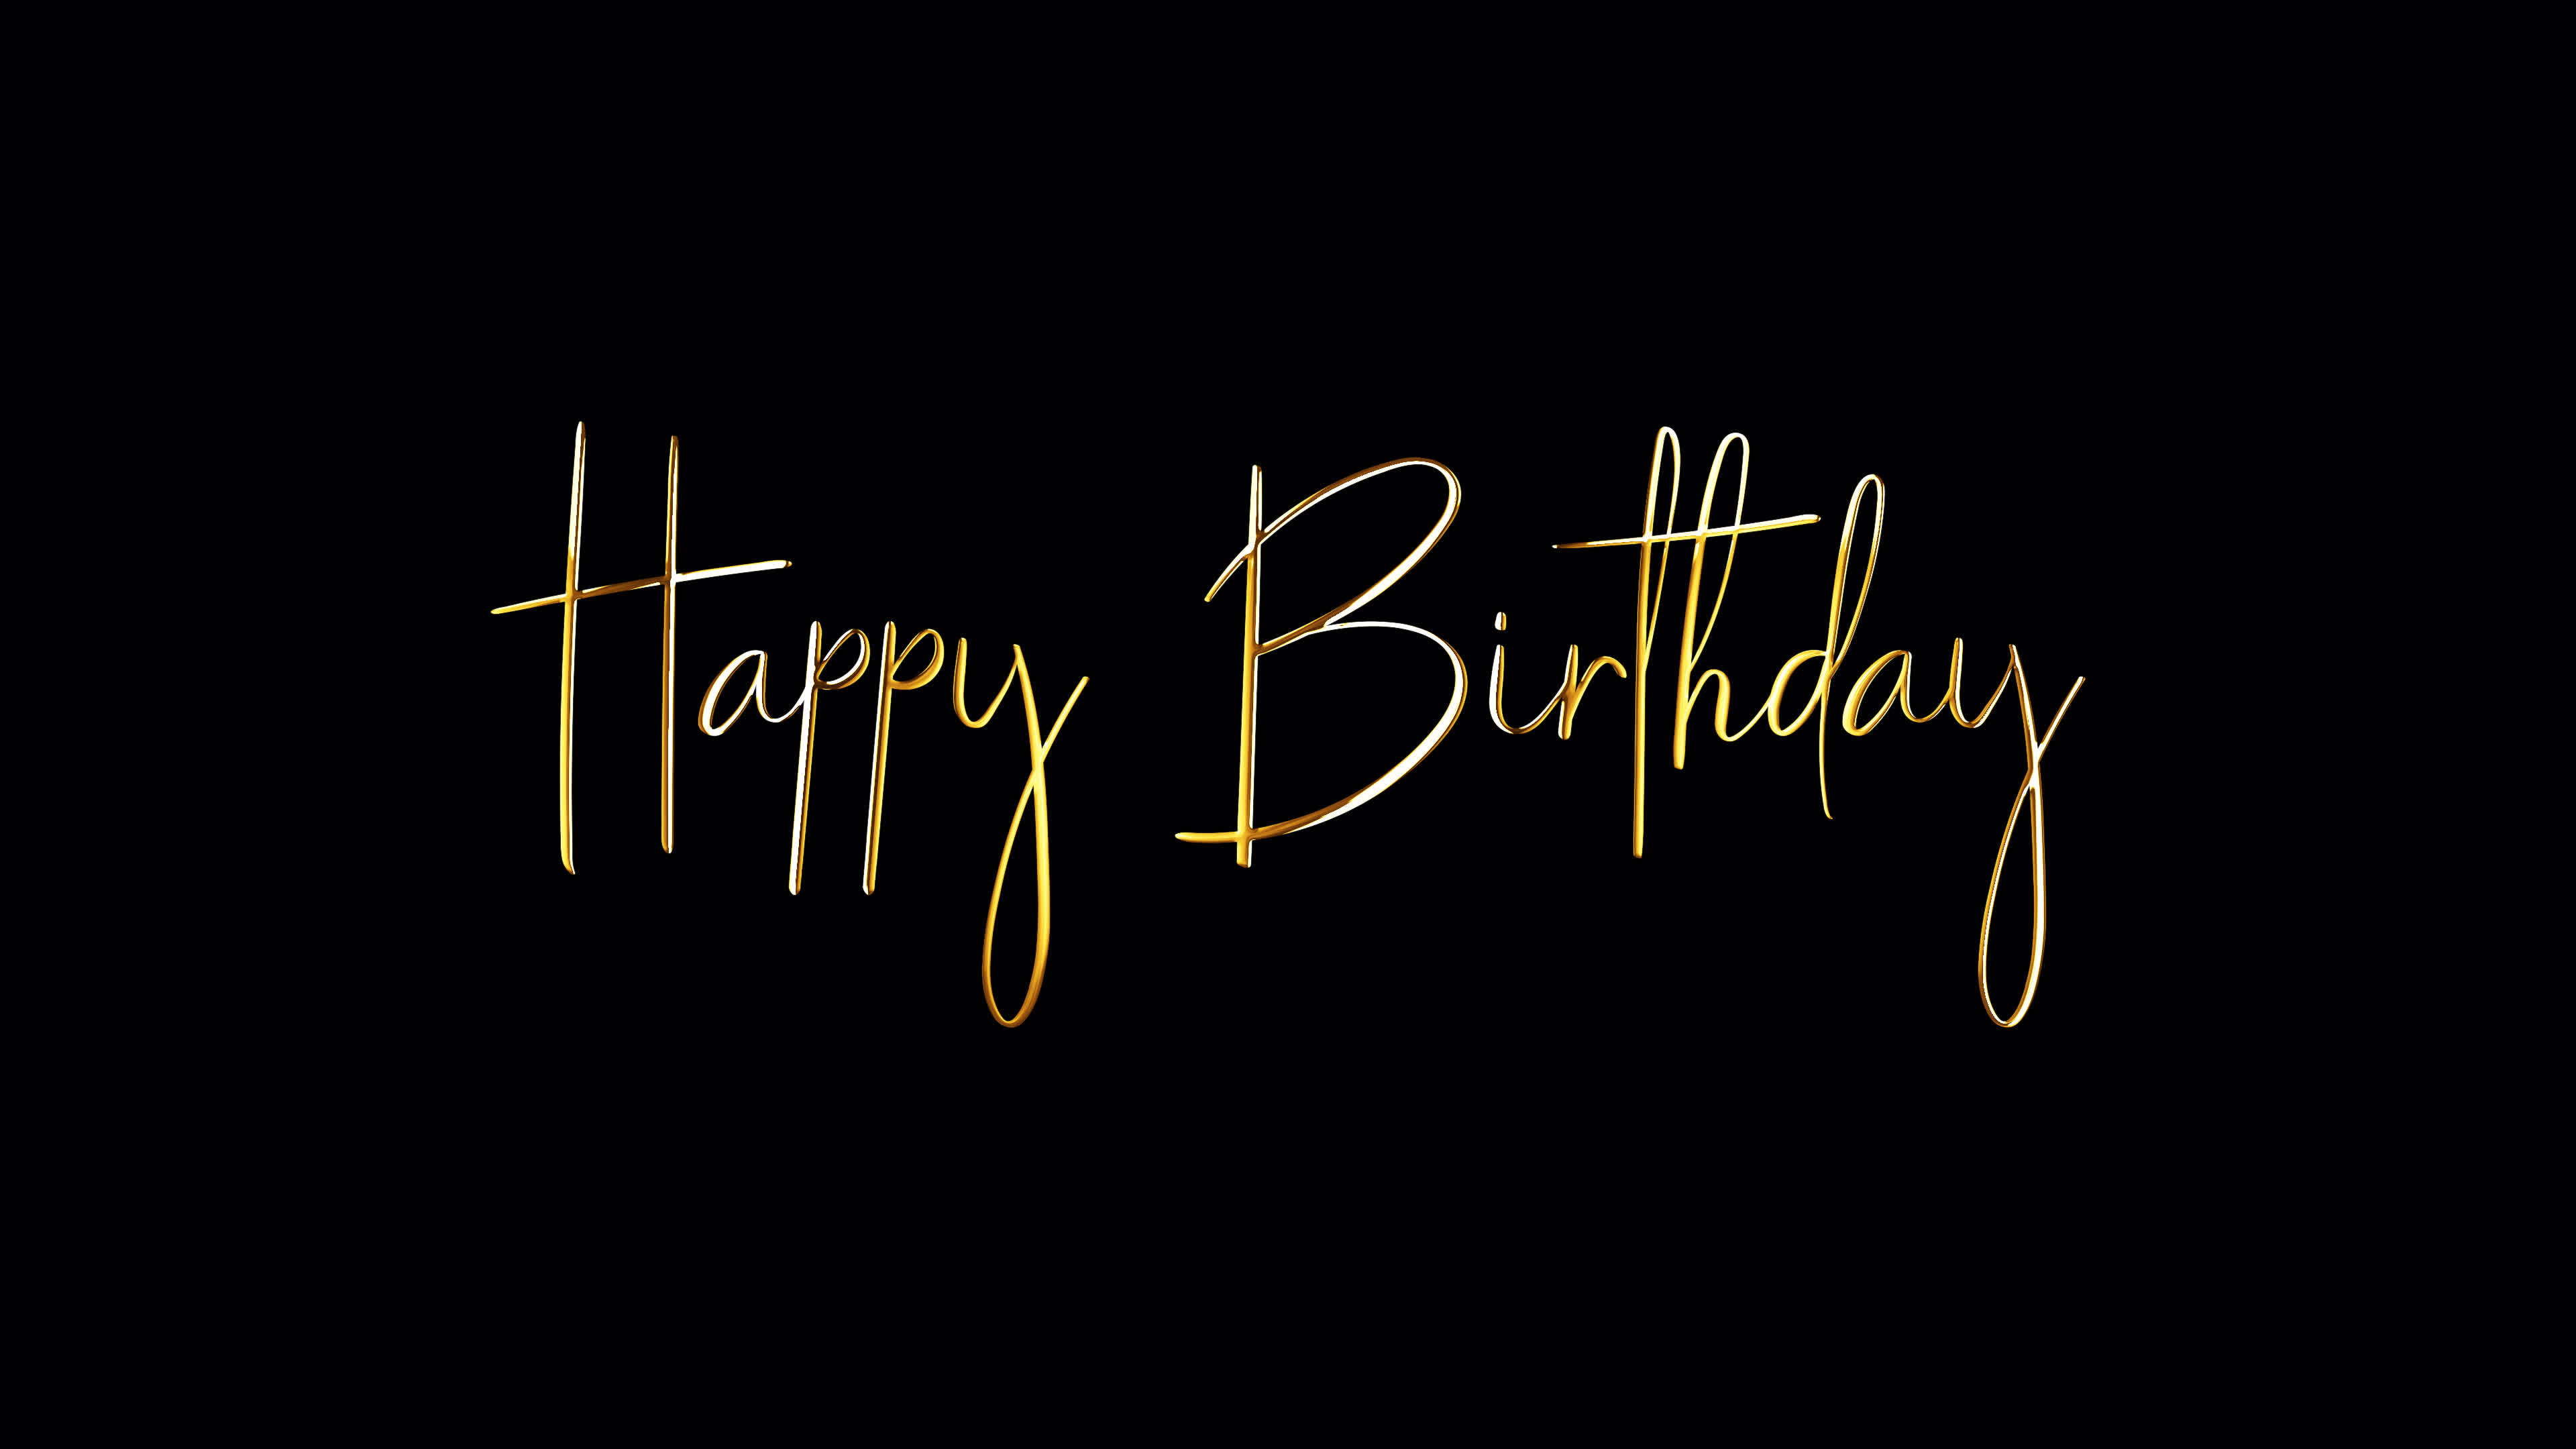 Happy Birthday Stock Video Footage for Free Download